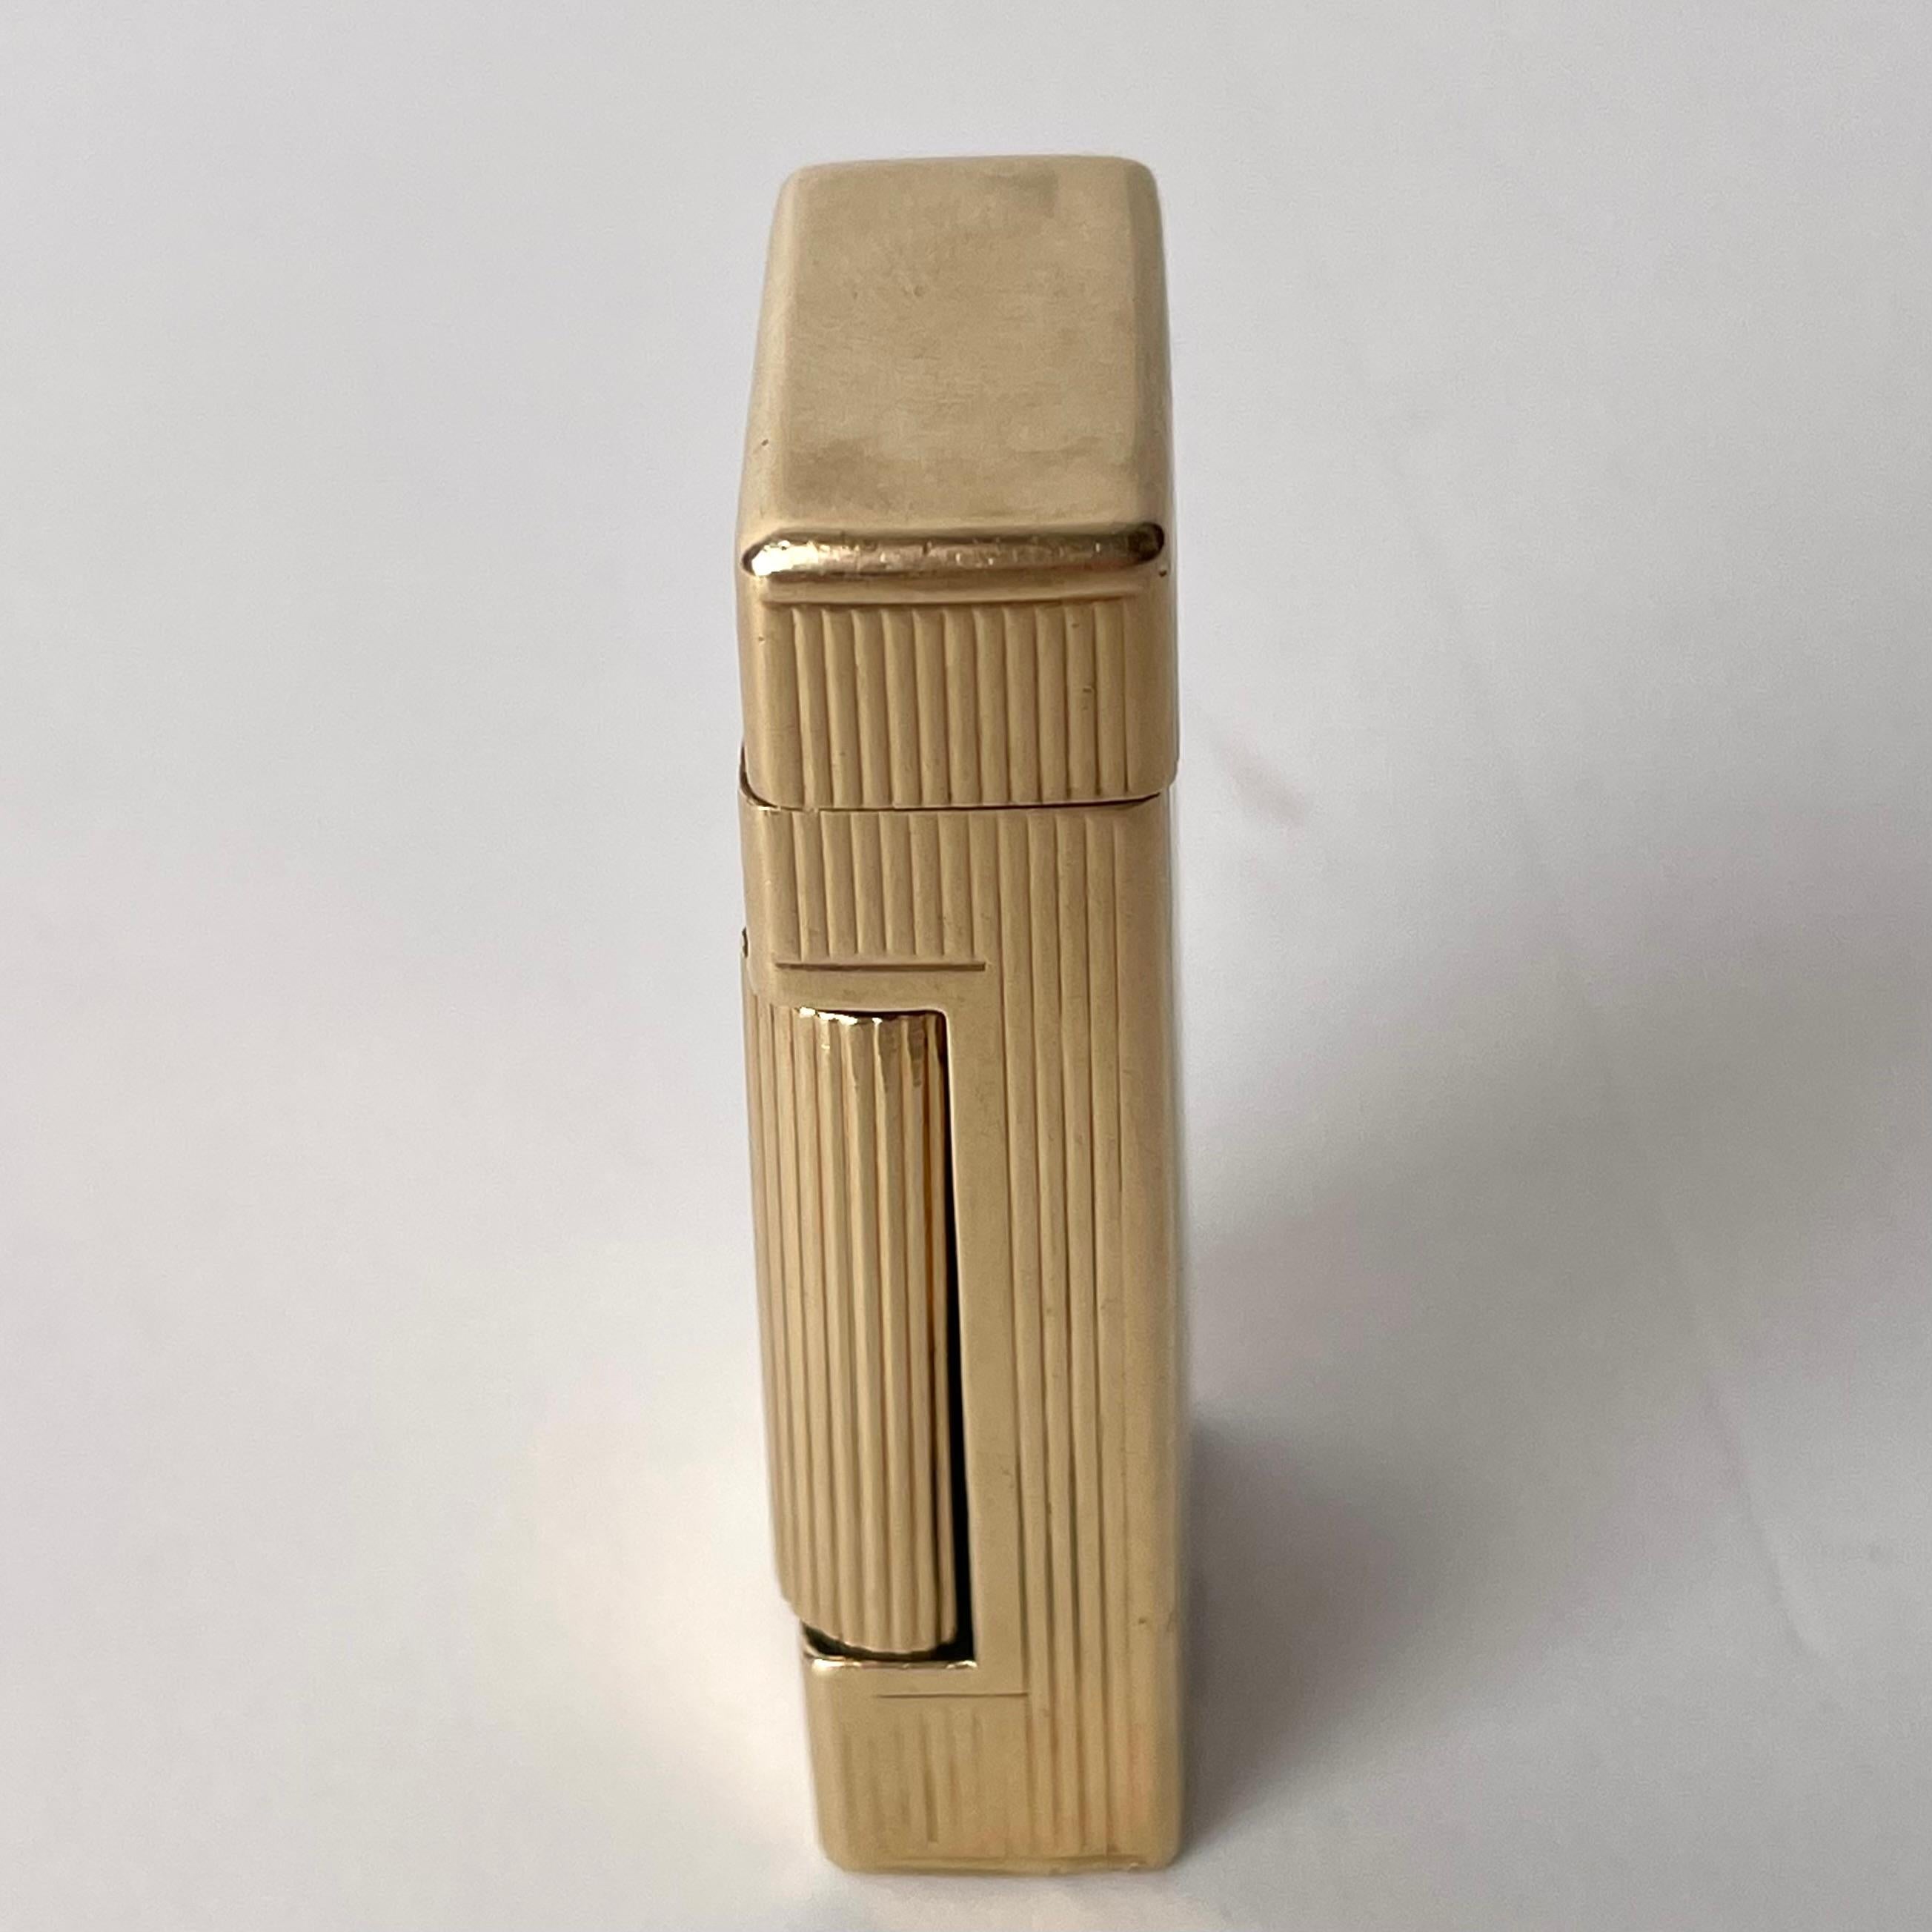 Mid-20th Century Dunhill 14 Carat Gold Cigarette Gasoline Lighter from 1940s-1950s